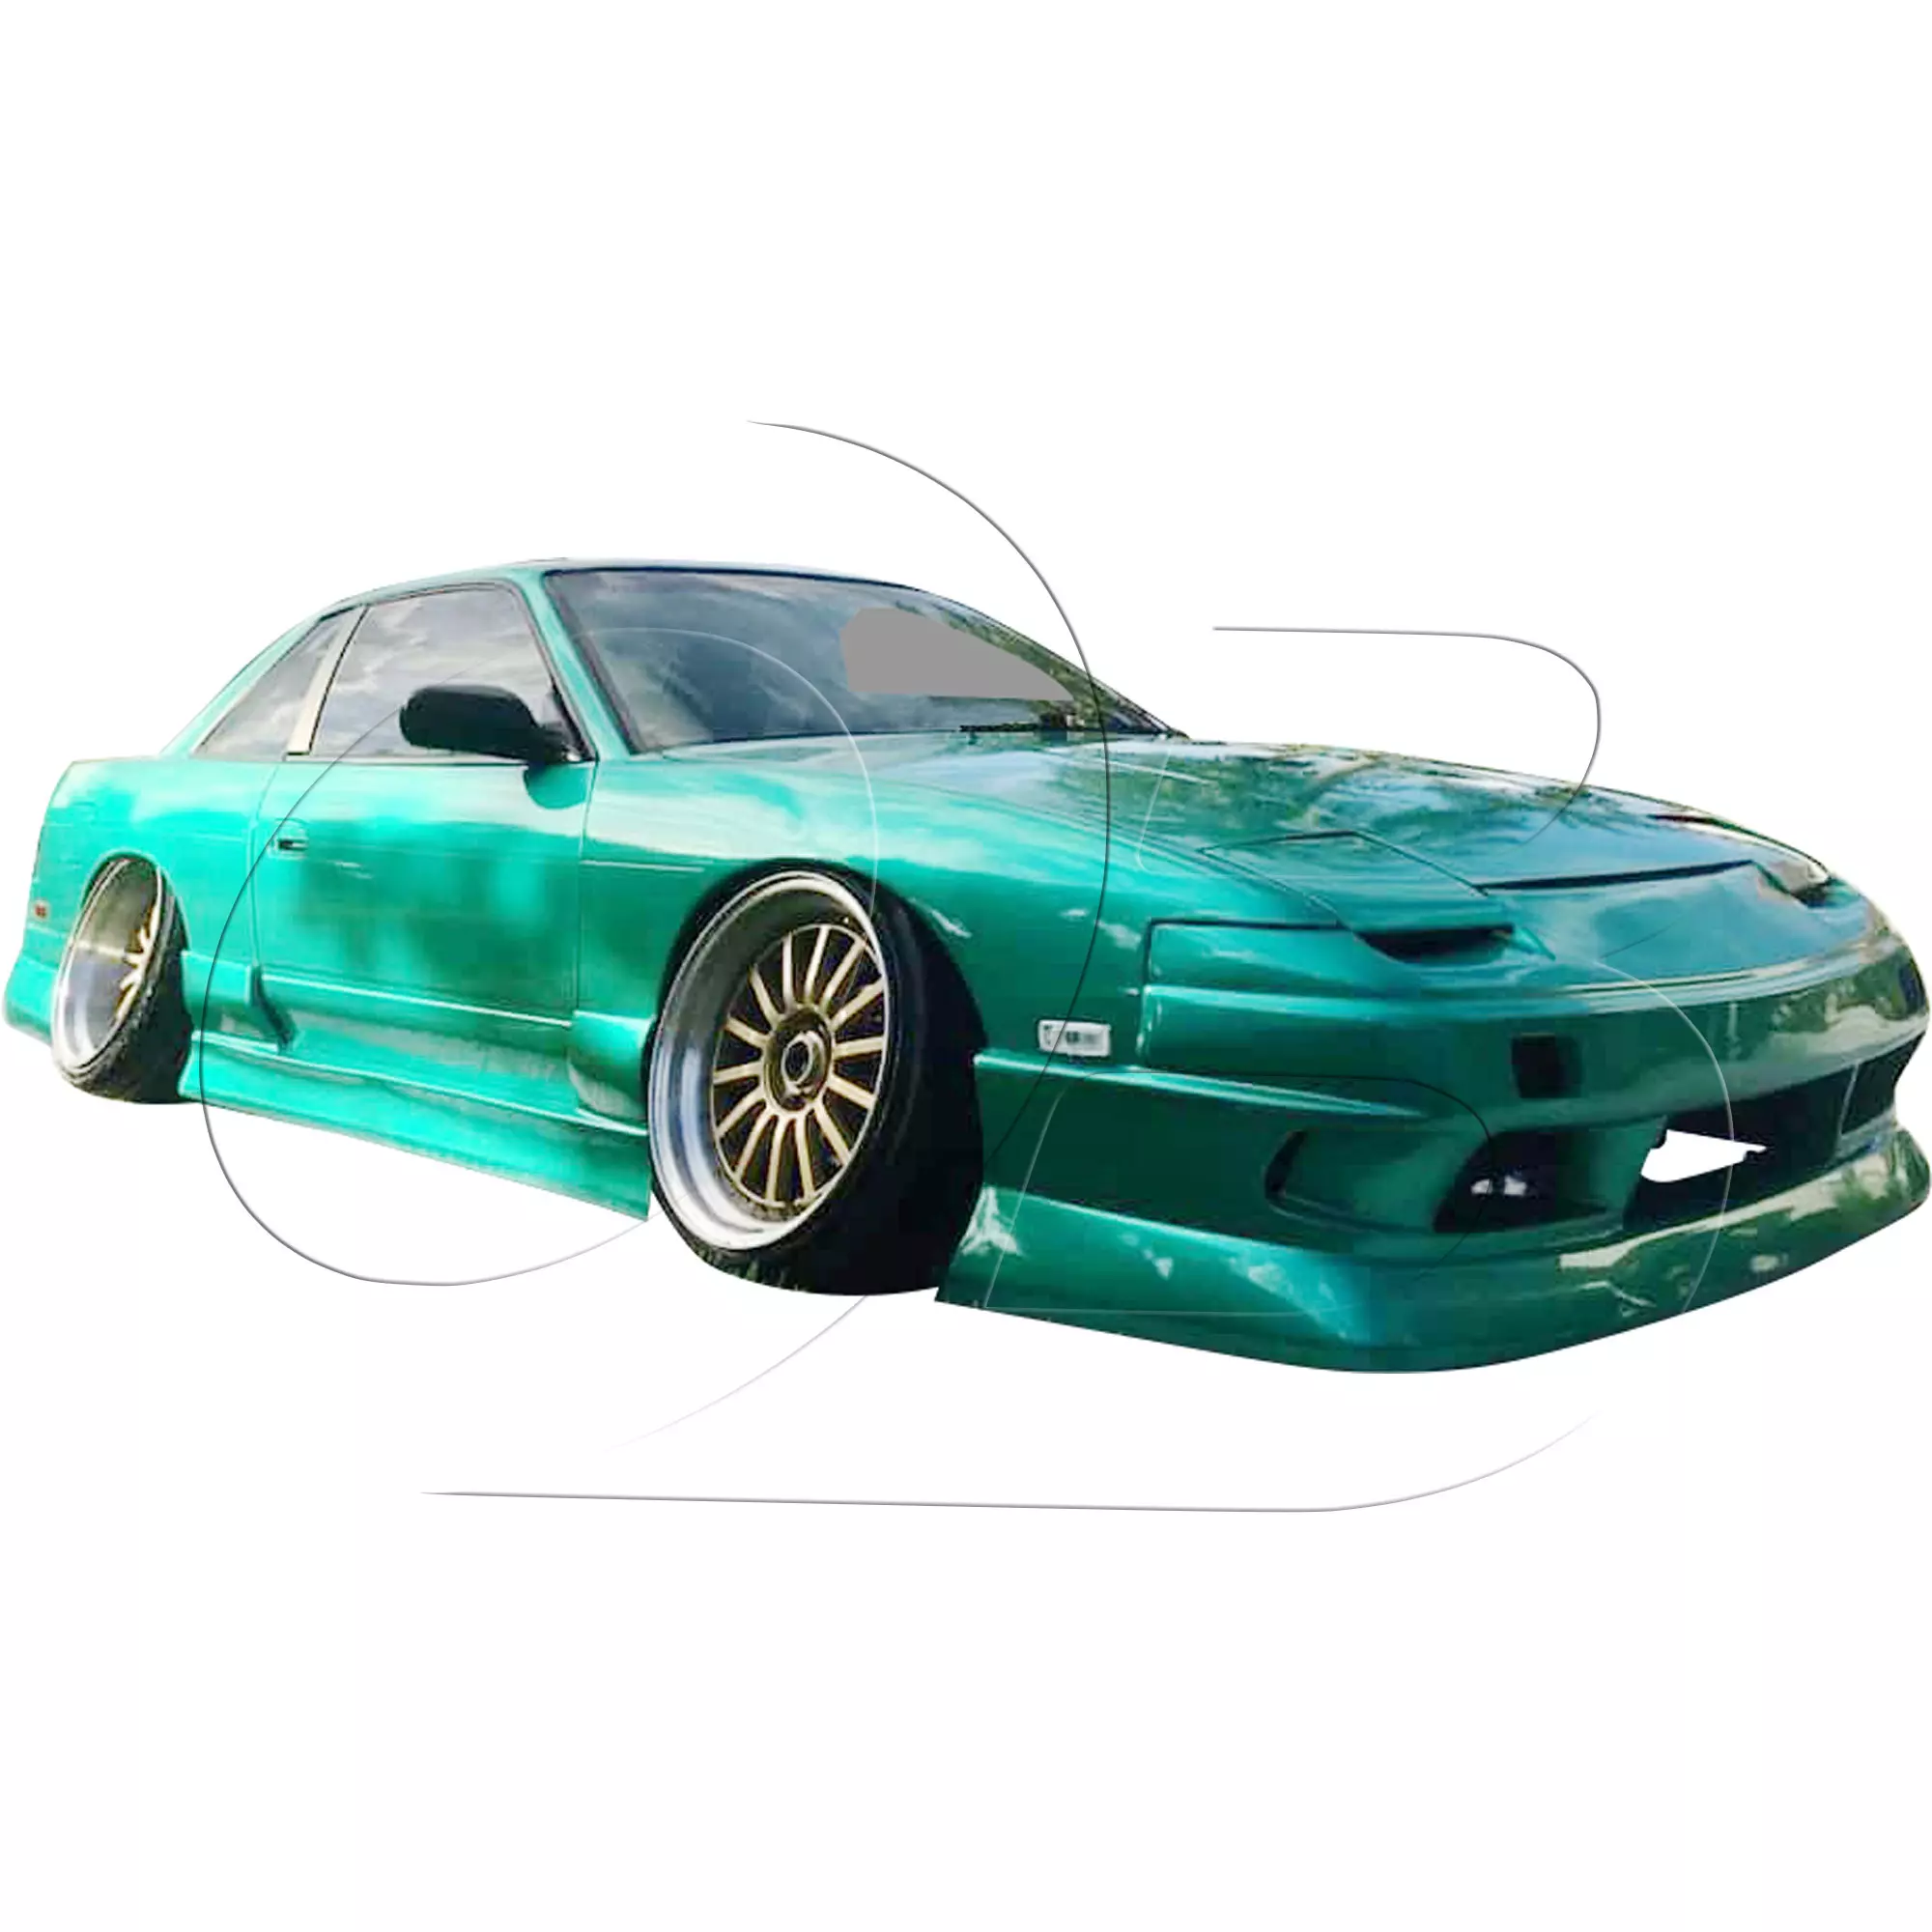 KBD Urethane Bsport2 Style 4pc Full Body Kit > Nissan 240SX 1989-1994 > 2dr Coupe - Image 8